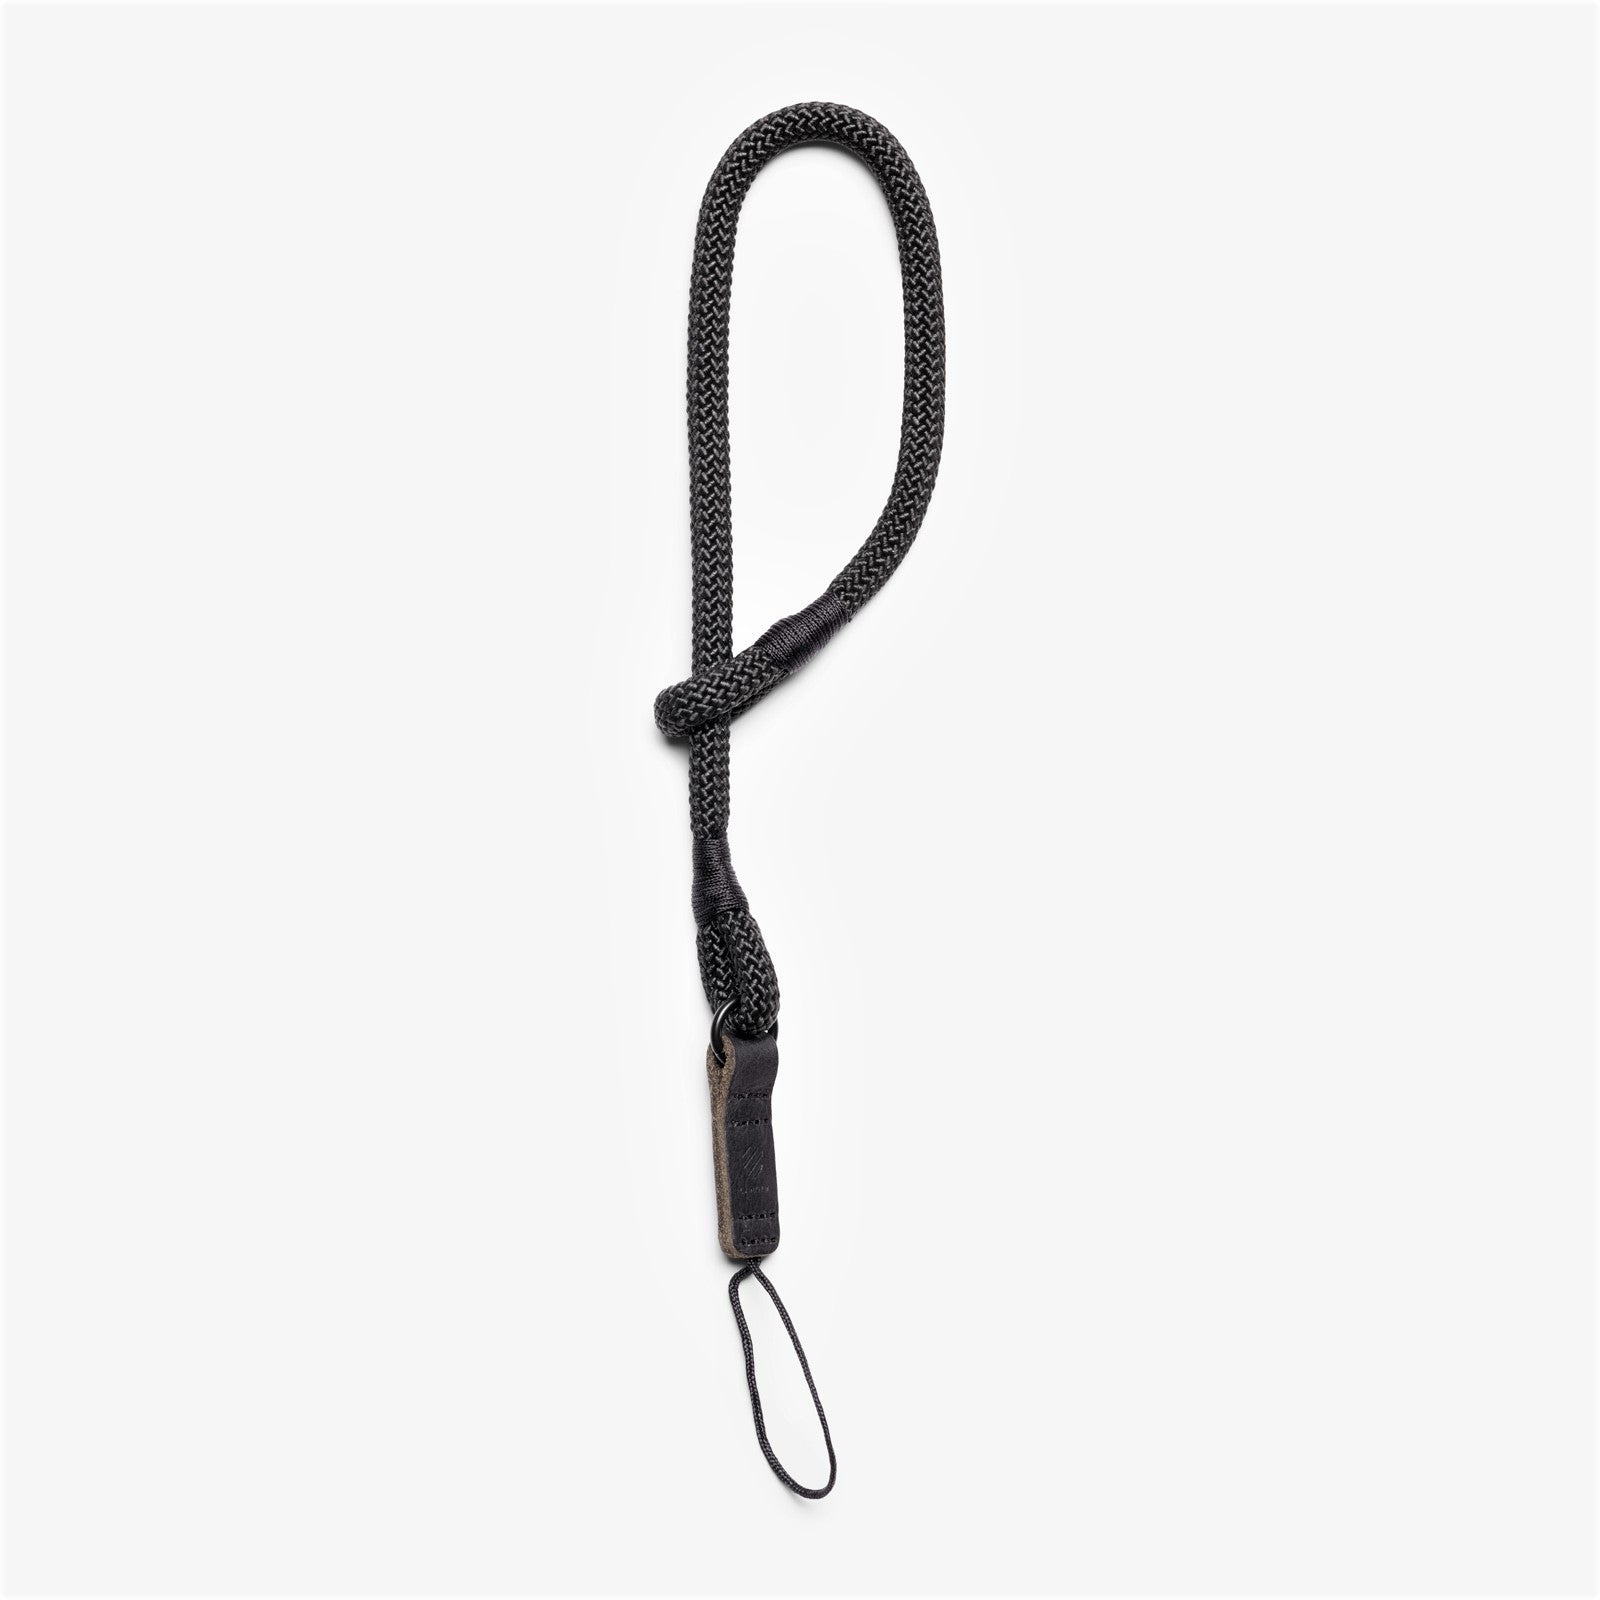 Langly Camera and Phone Wrist Strap (Black)